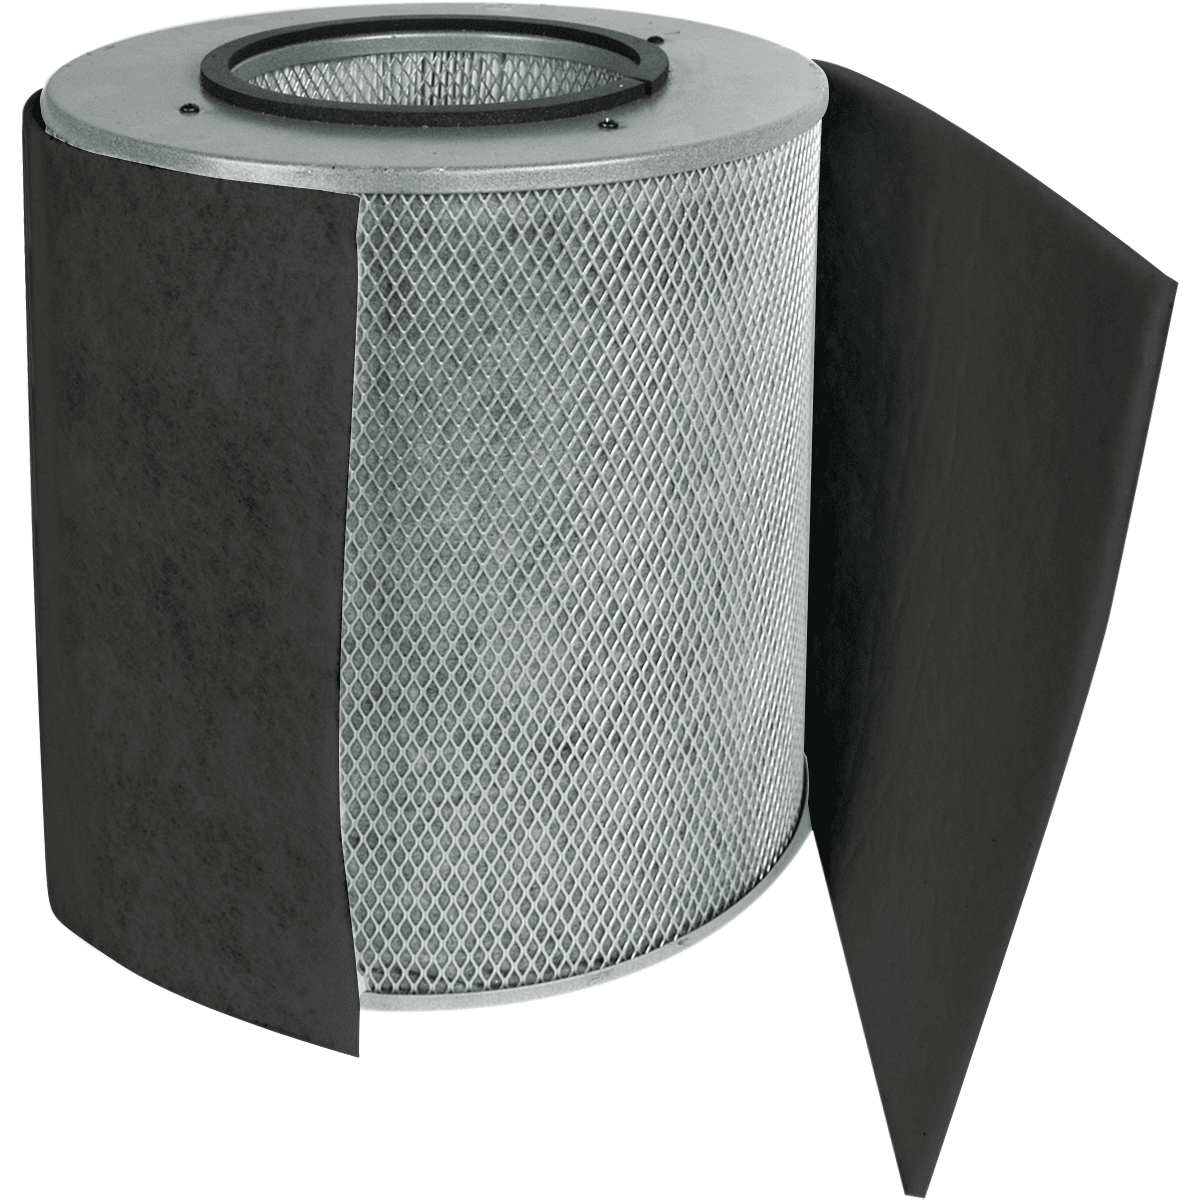 Austin Air Bedroom Machine Replacement Filter With Prefilter (Dark Color)